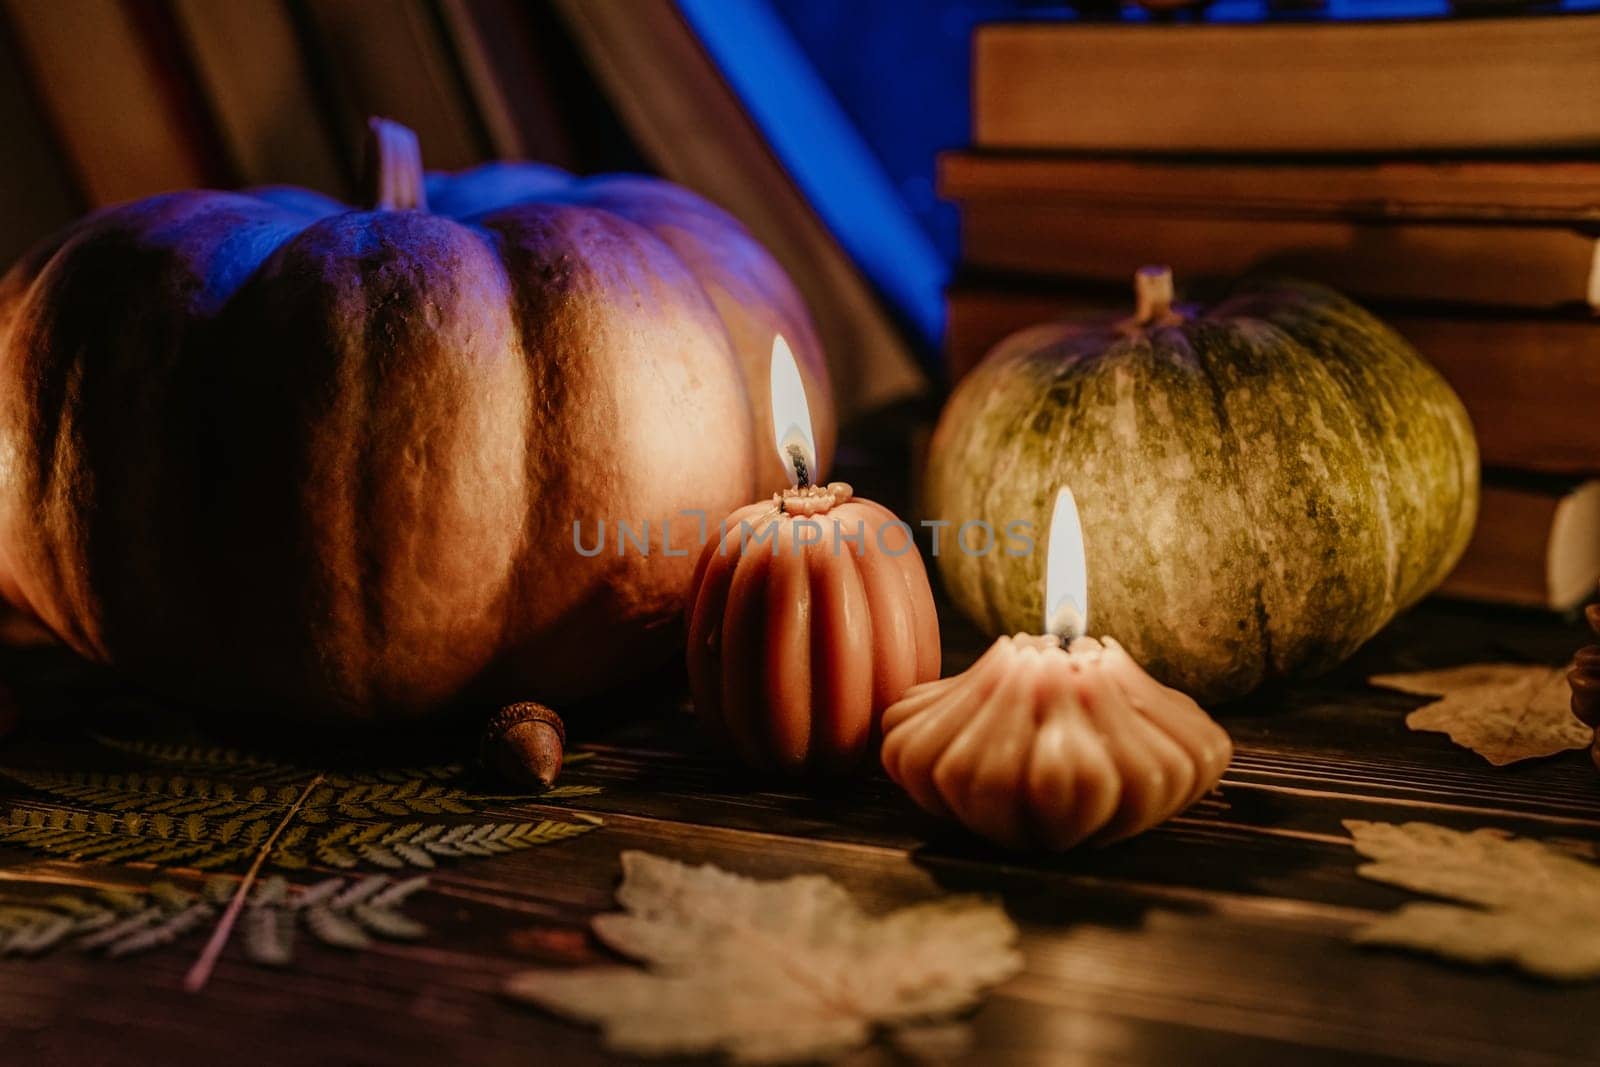 Autumn background. Pumpkin candle, orange fallen leaves. Flat lay. Cozy ambiance of fall, candle burning. Seasonal promotions or tranquil visual storytelling.